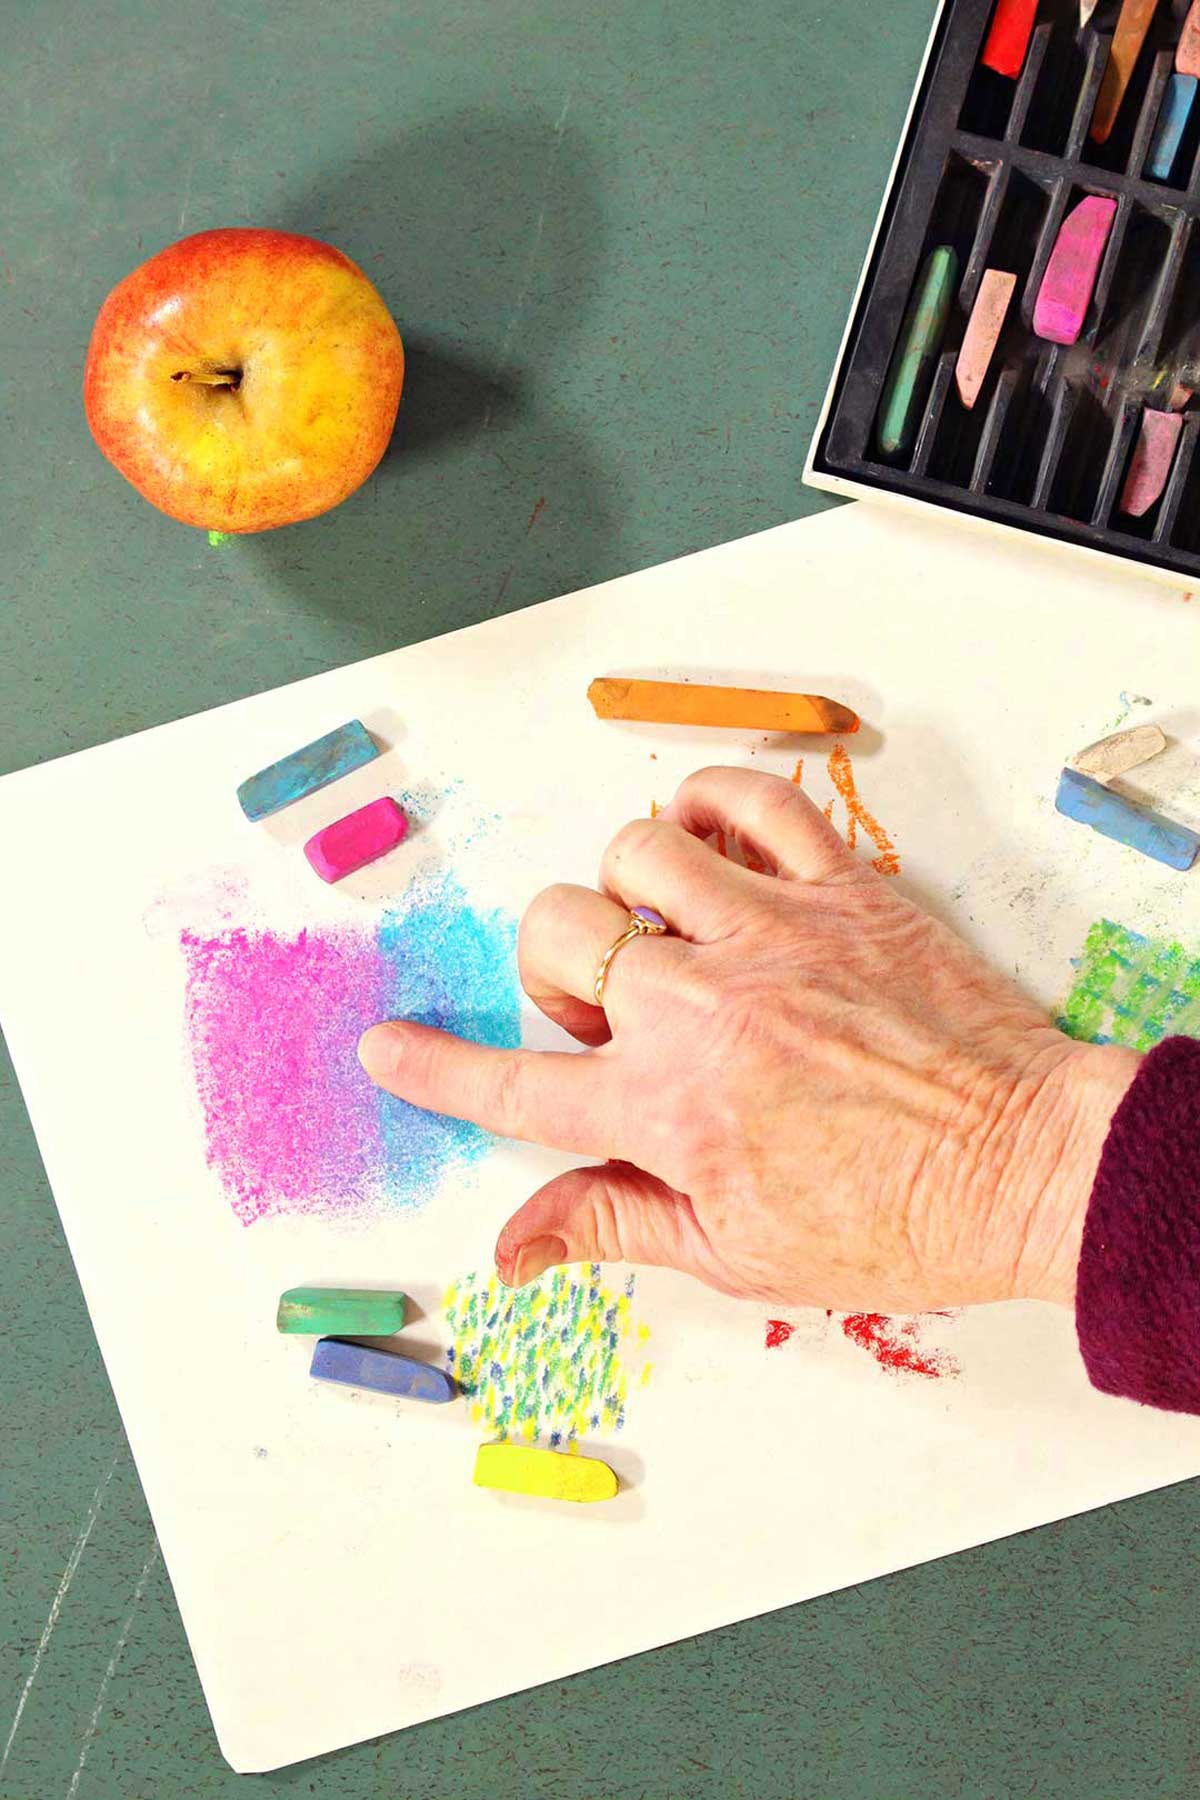 Hand blending colors of pastels on a piece of paper with pastels and a fresh apple on green counter.